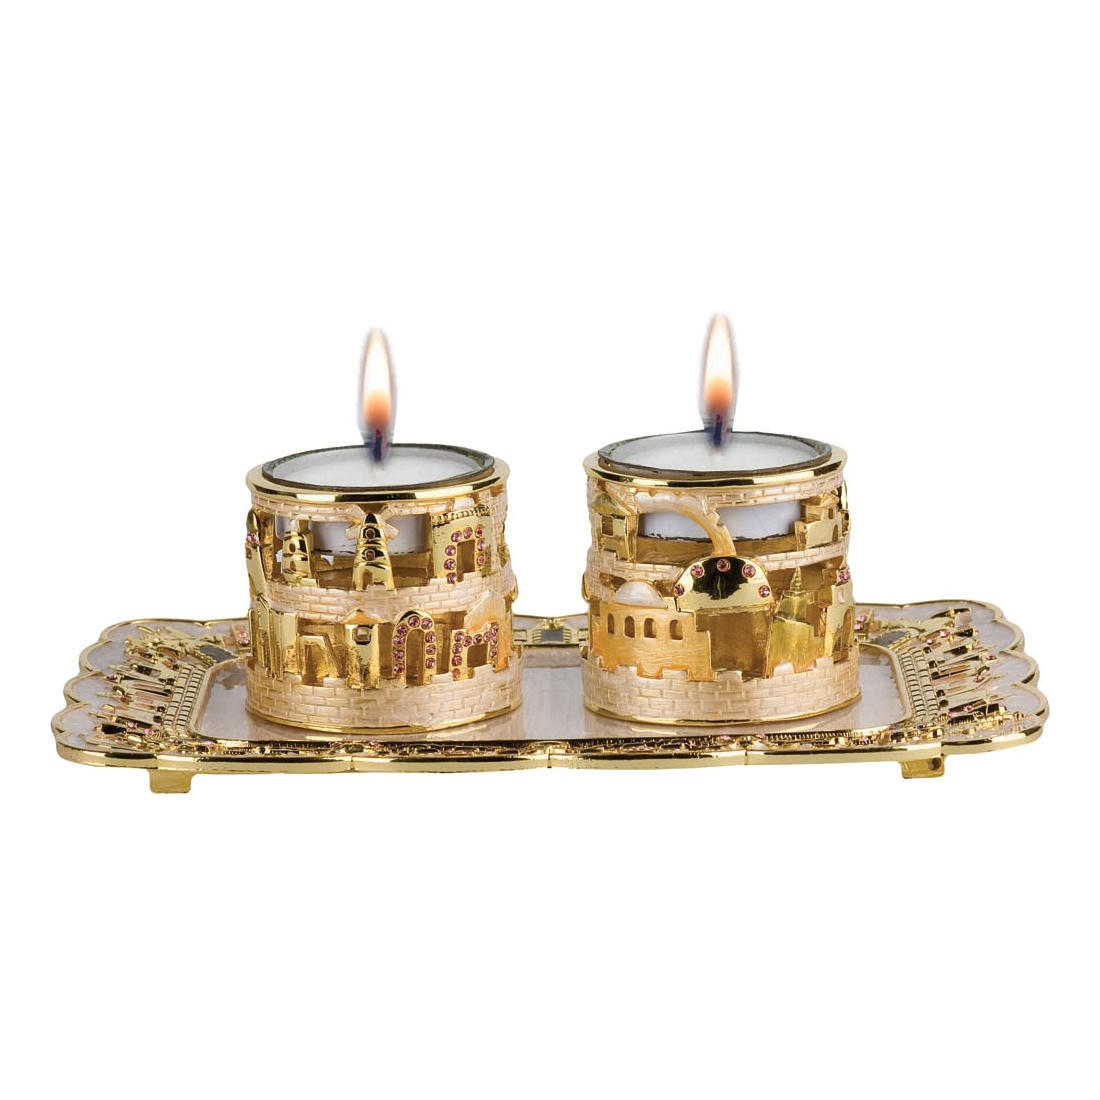 24K Gold Plated Jerusalem Candle Holders with Tray - Ivory with Amber Crystals - 1